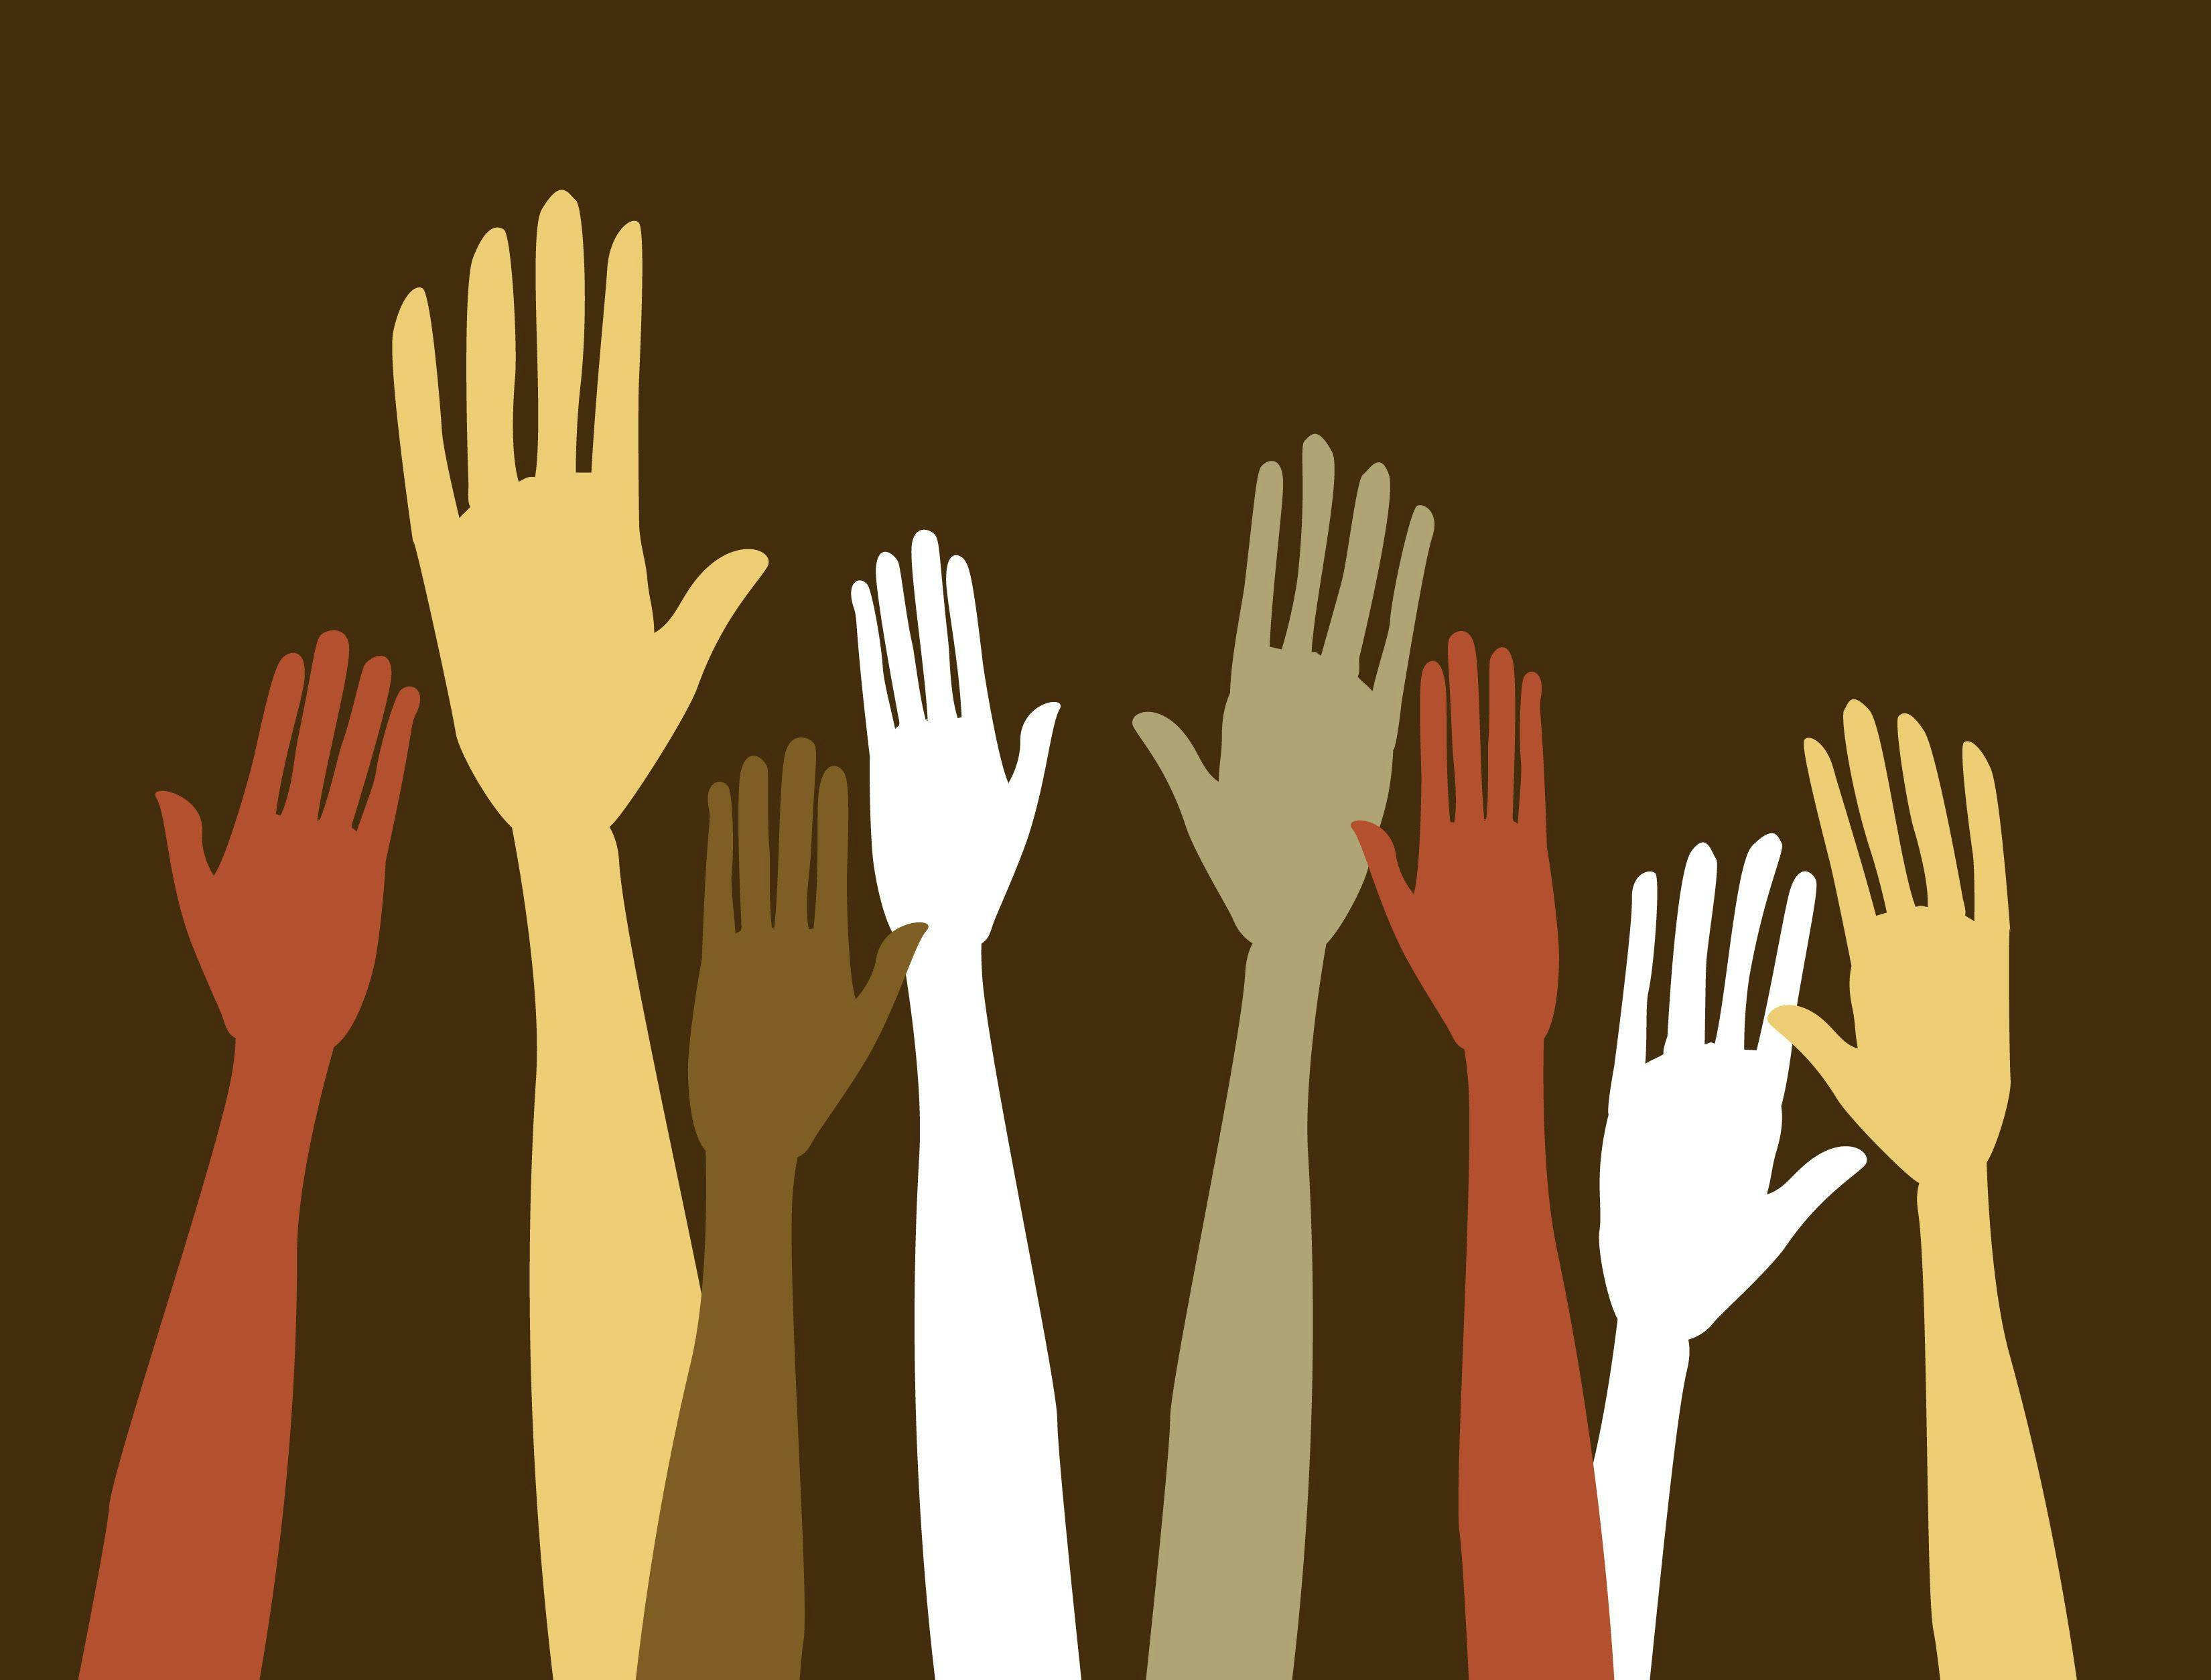 Raised hands of diverse populations.